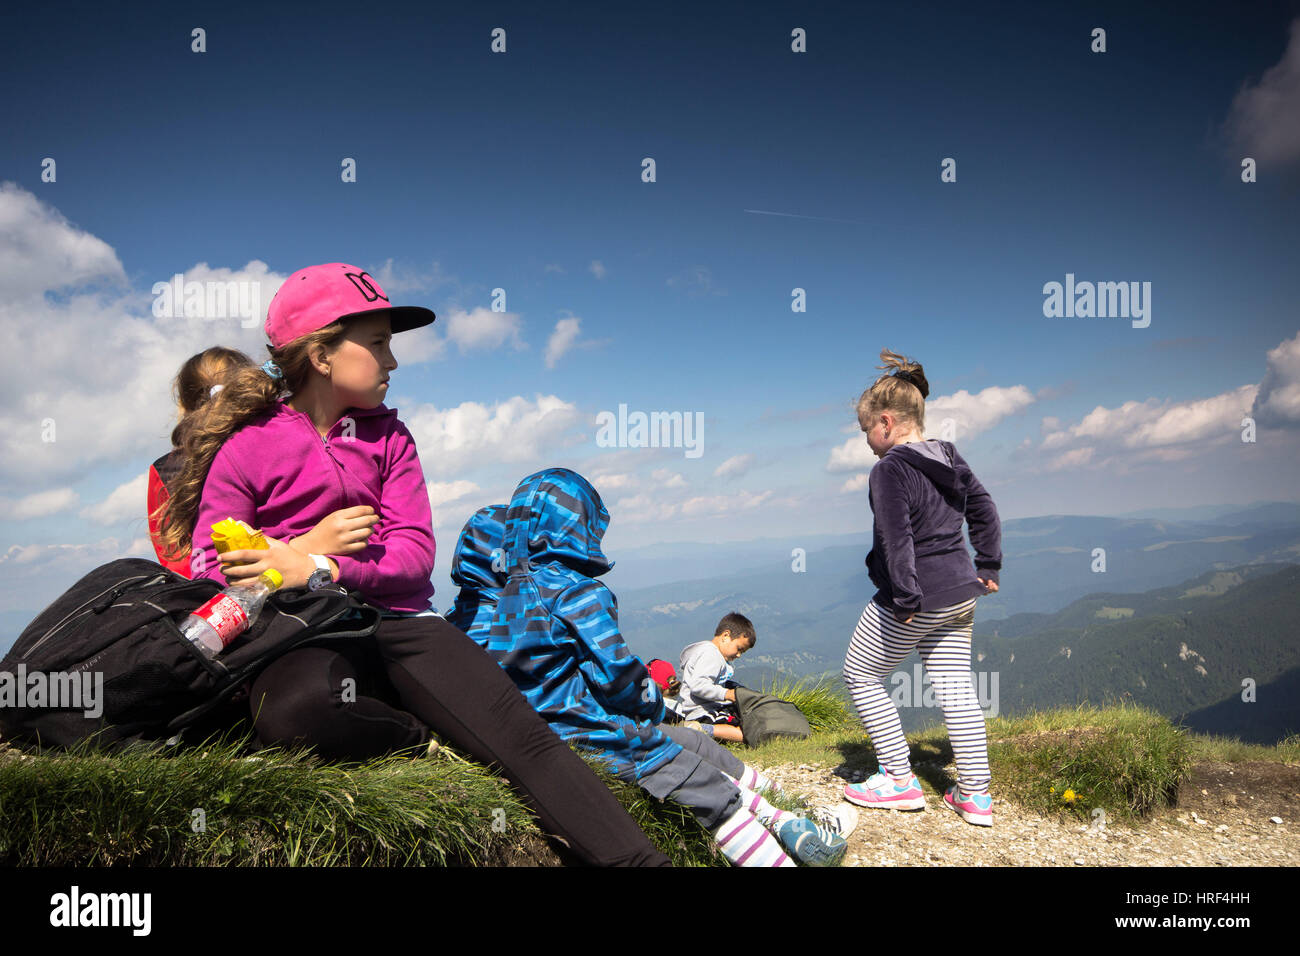 Kids are having a snack after a long hike on the mountain Stock Photo